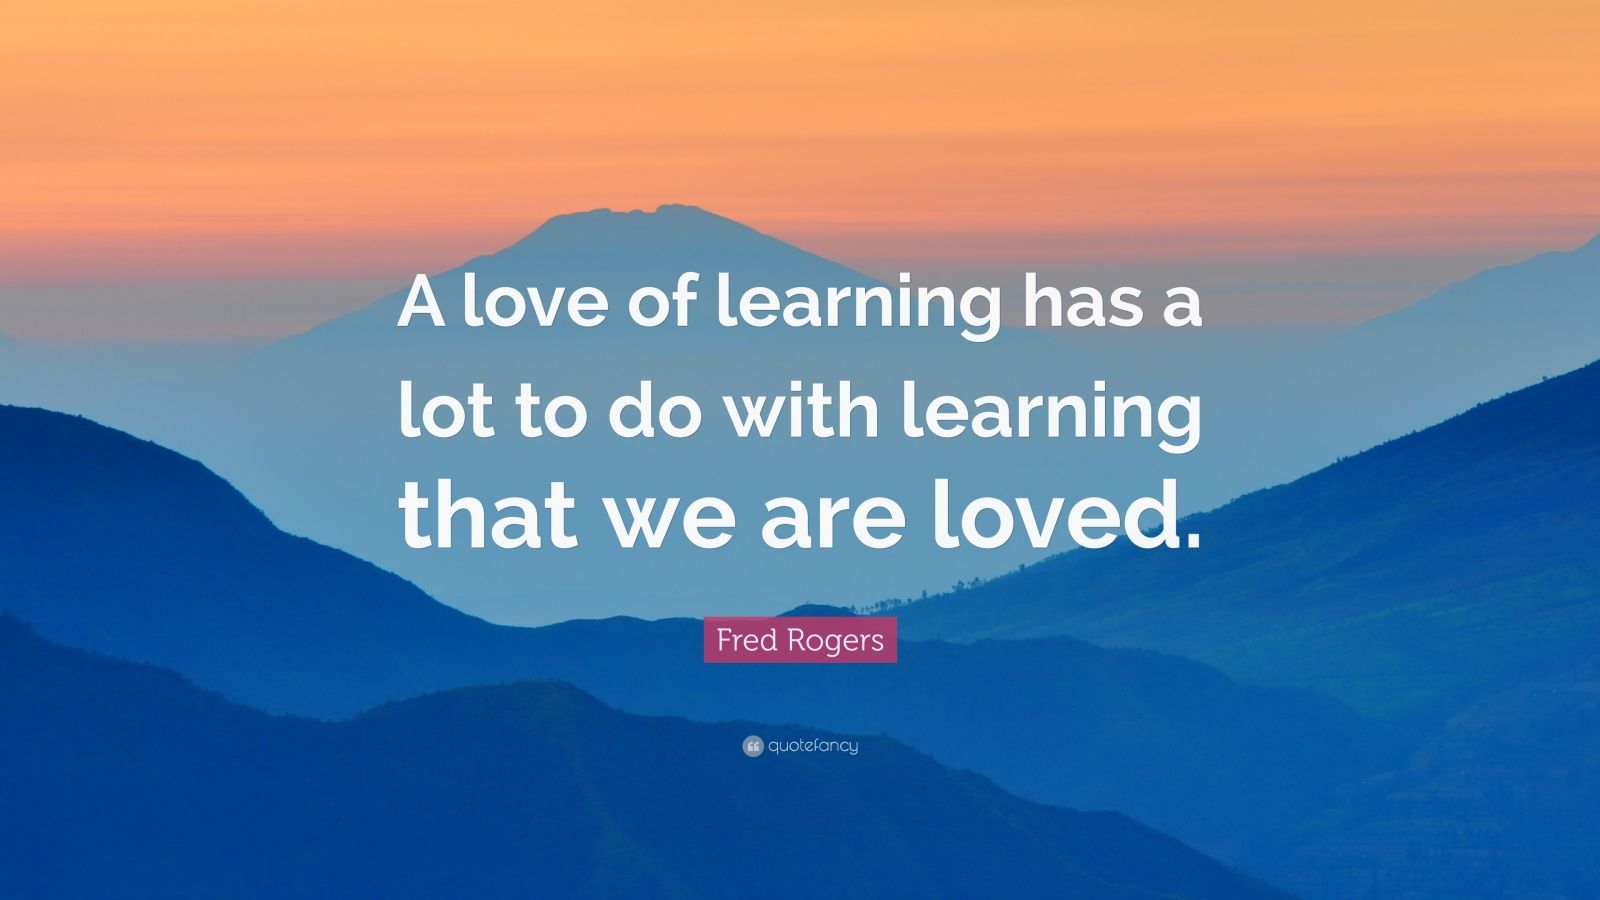 Fred Rogers Quote “A love of learning has a lot to do